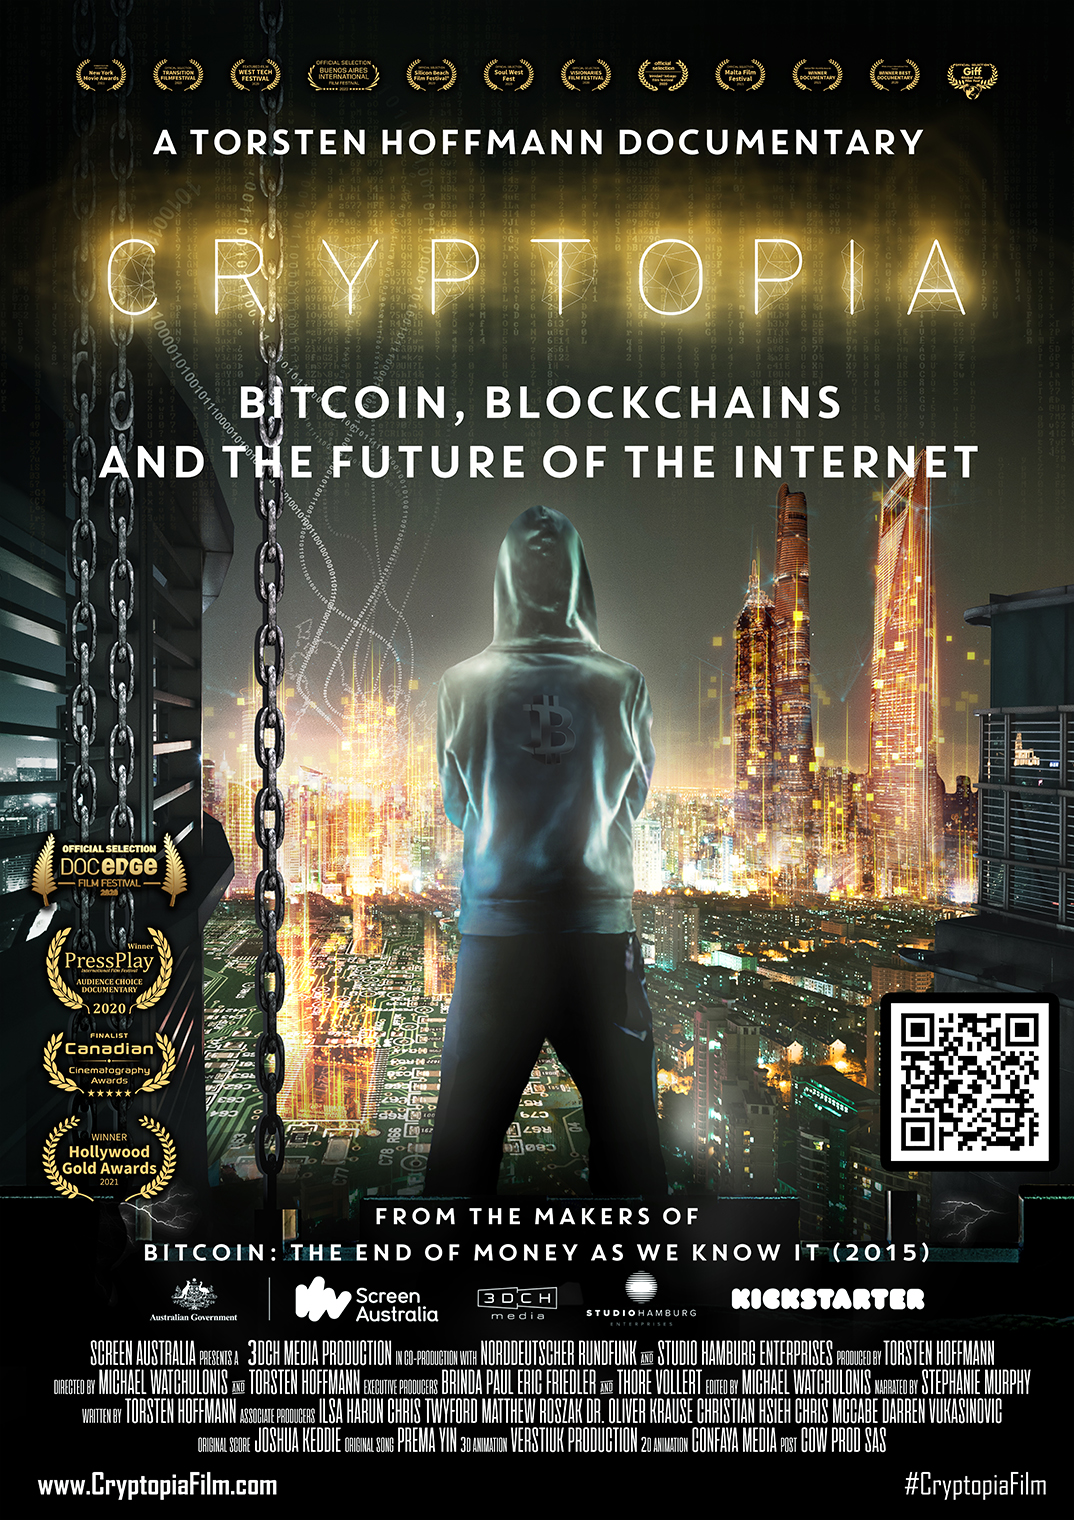 My feed | Articles | Best crypto movies & documentaries